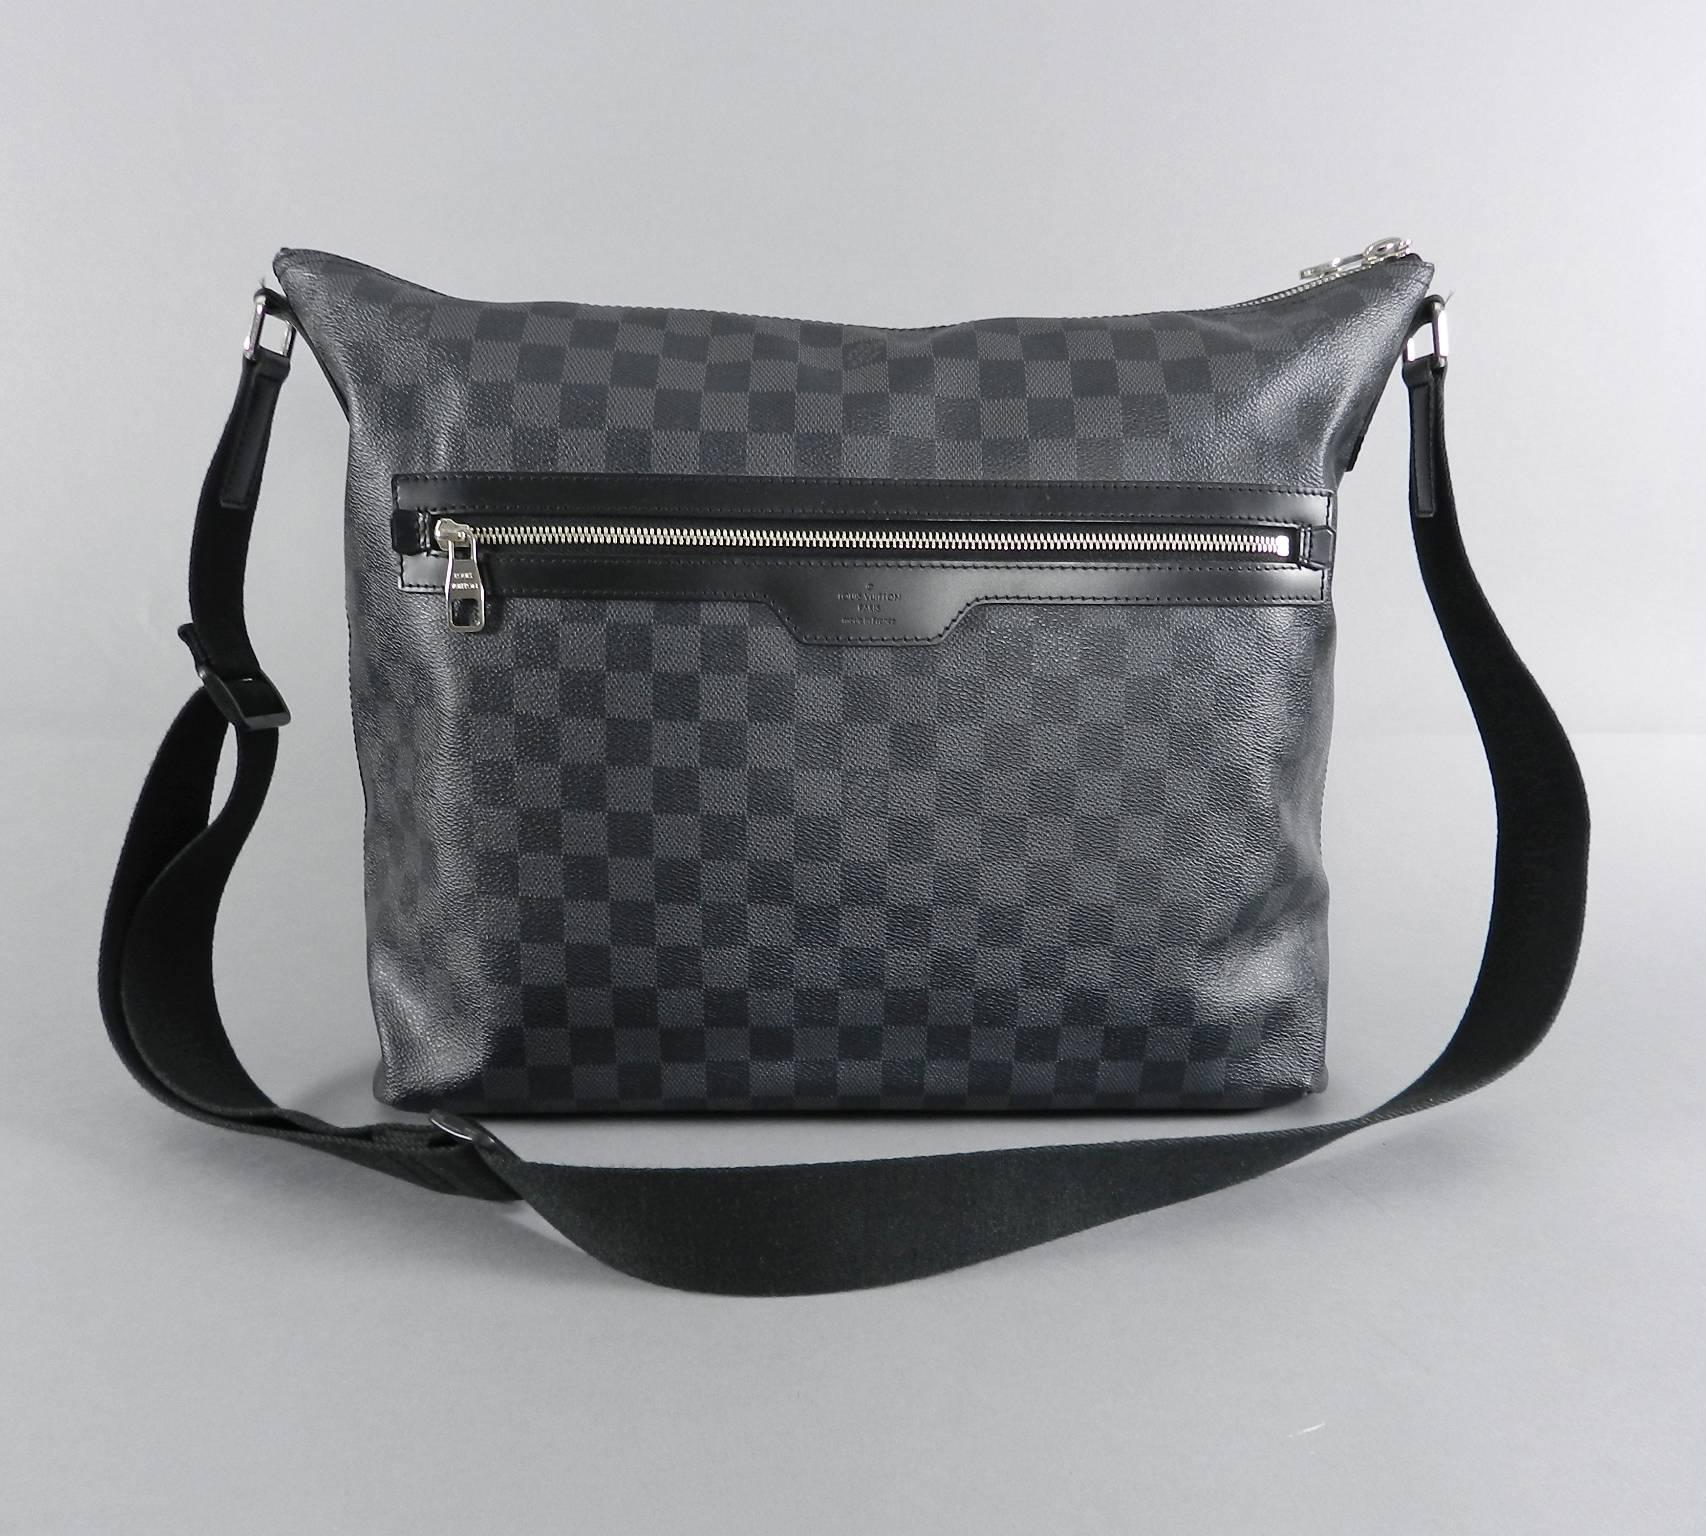 Louis Vuitton Damier graphite Mick GM messenger bag.  Excellent pre-owned - Clean interior and exterior. Corners are excellent with no wear. Includes duster. Date code SR2101 for production year 2011.  Body of bag measures about 15 x 13 x 5.5".